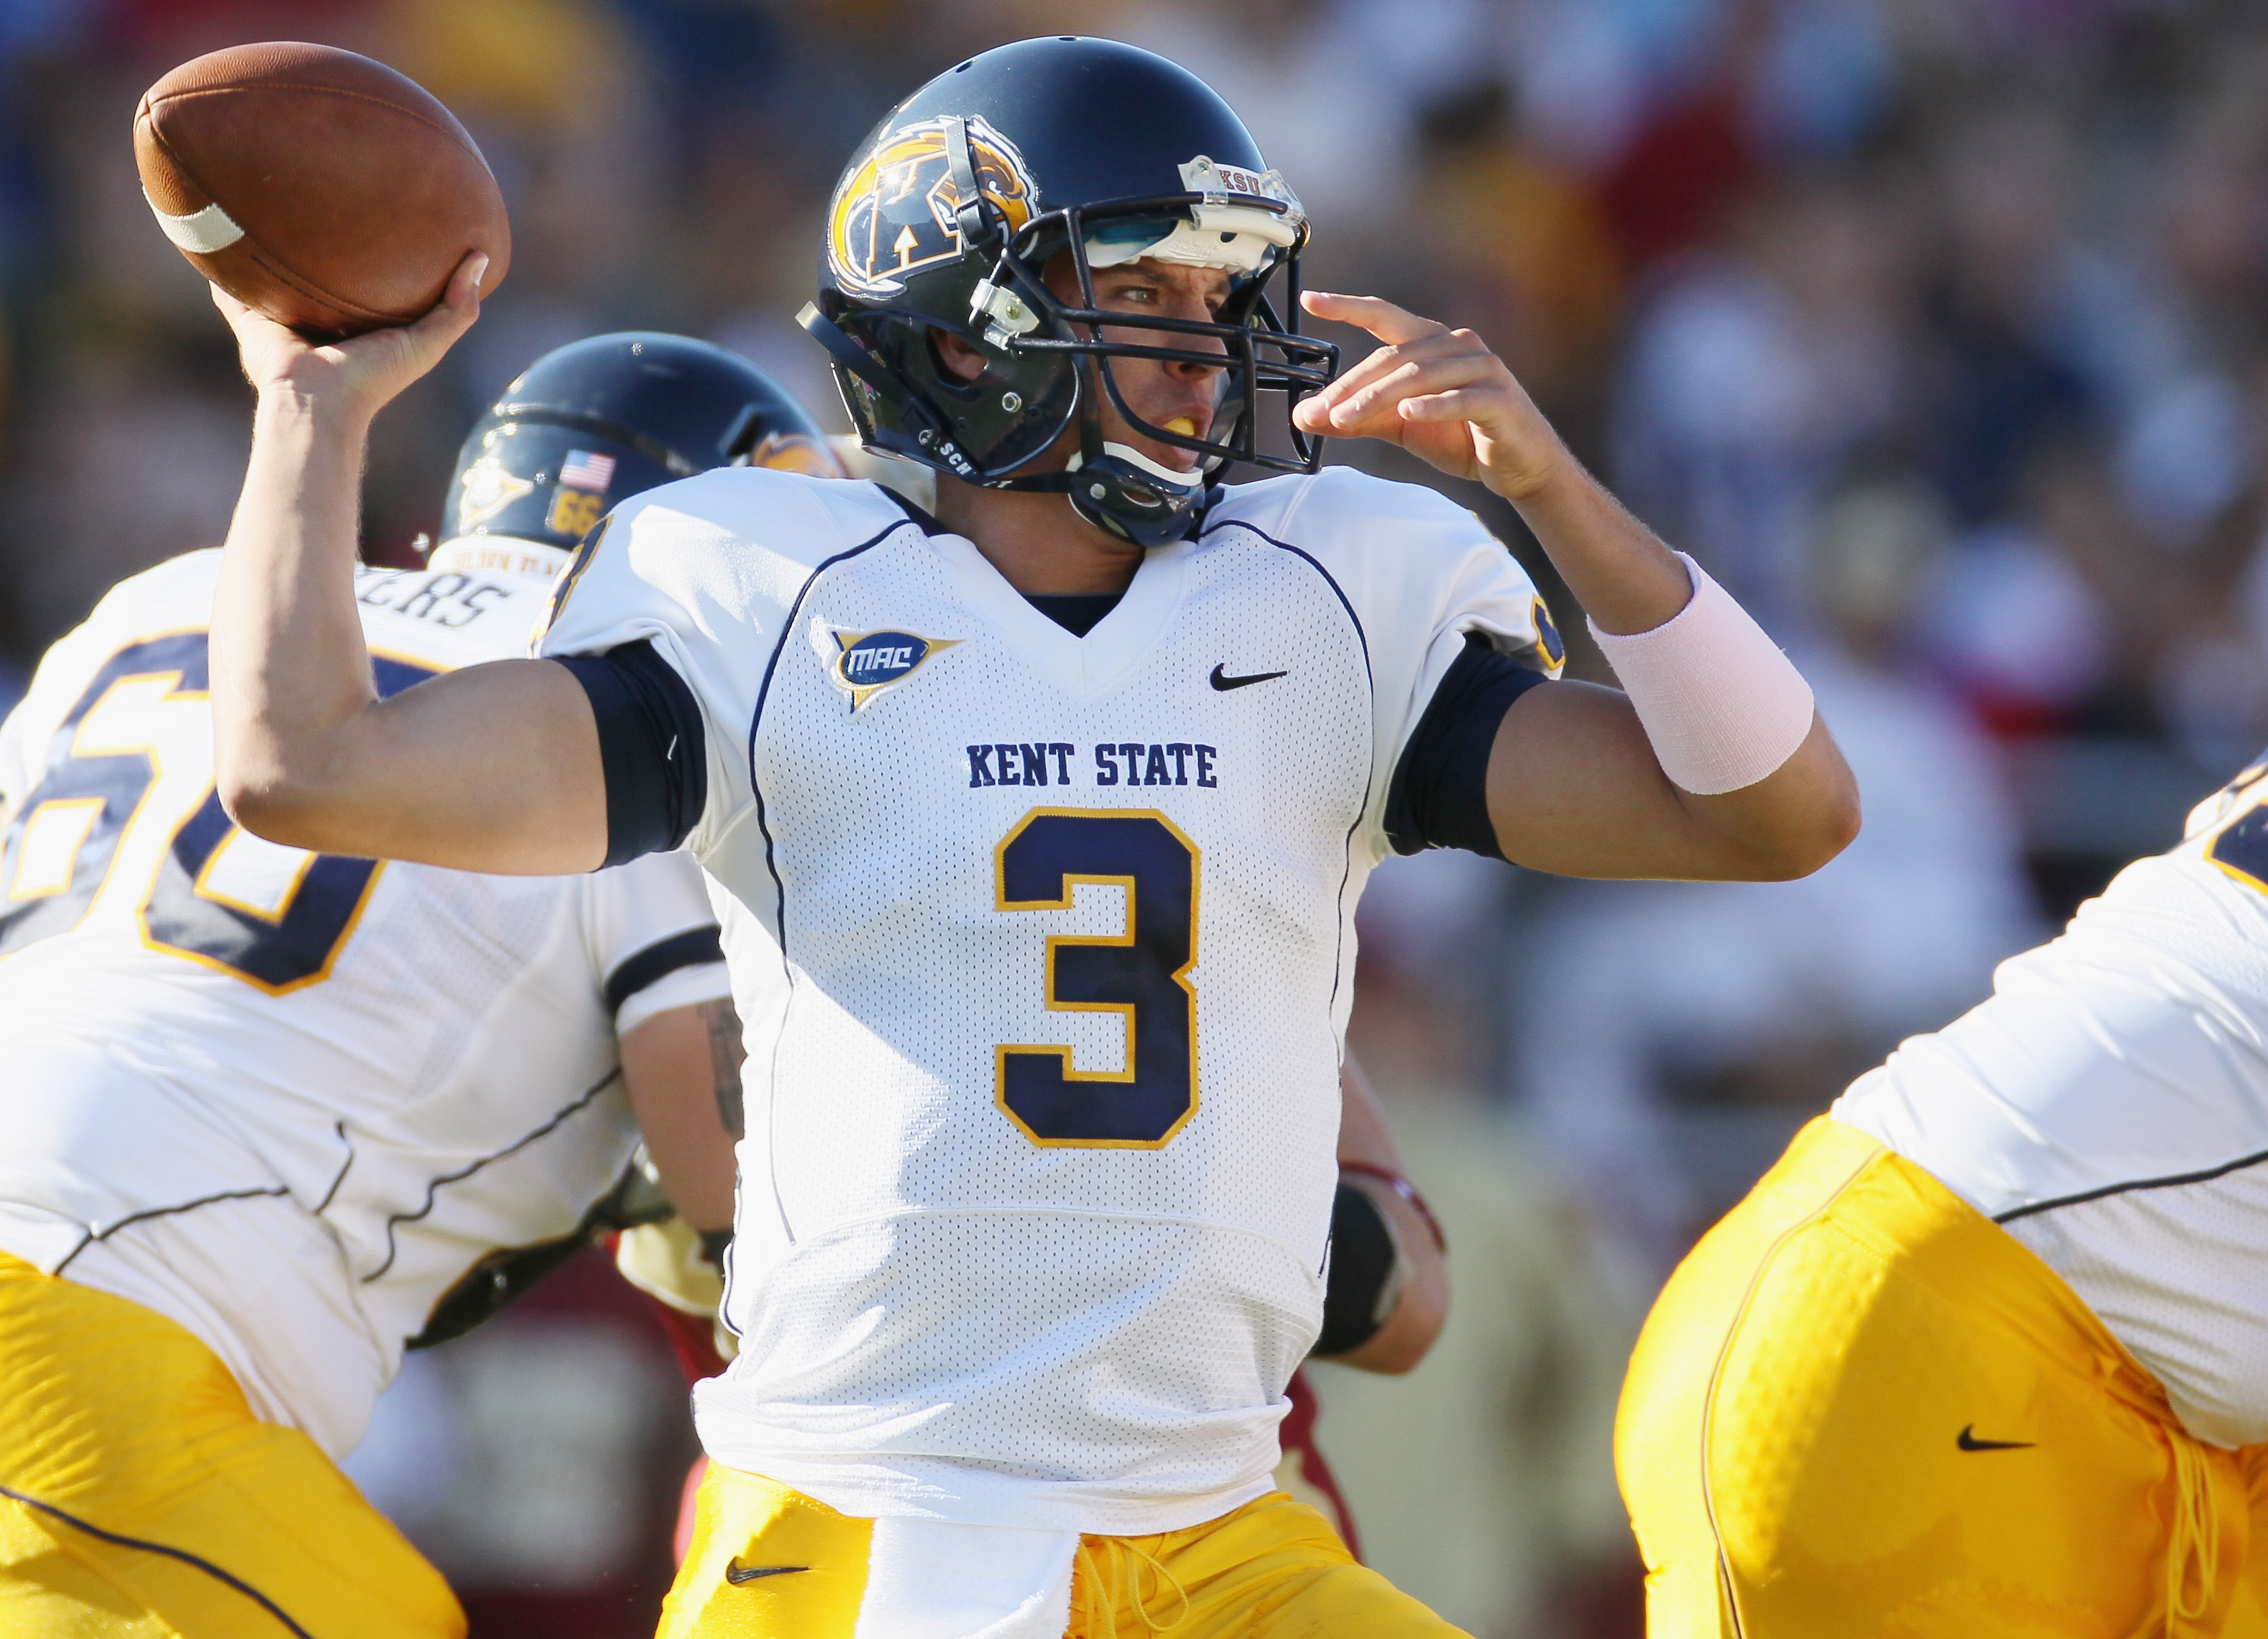 CHESTNUT HILL, MA - SEPTEMBER 11:  Spencer Keith #3 of the Kent State Golden Flashes passes in the first half against the Boston College Eagles on September 11, 2010 at Alumni Stadium in Chestnut Hill, Massachusetts.  (Photo by Elsa/Getty Images)